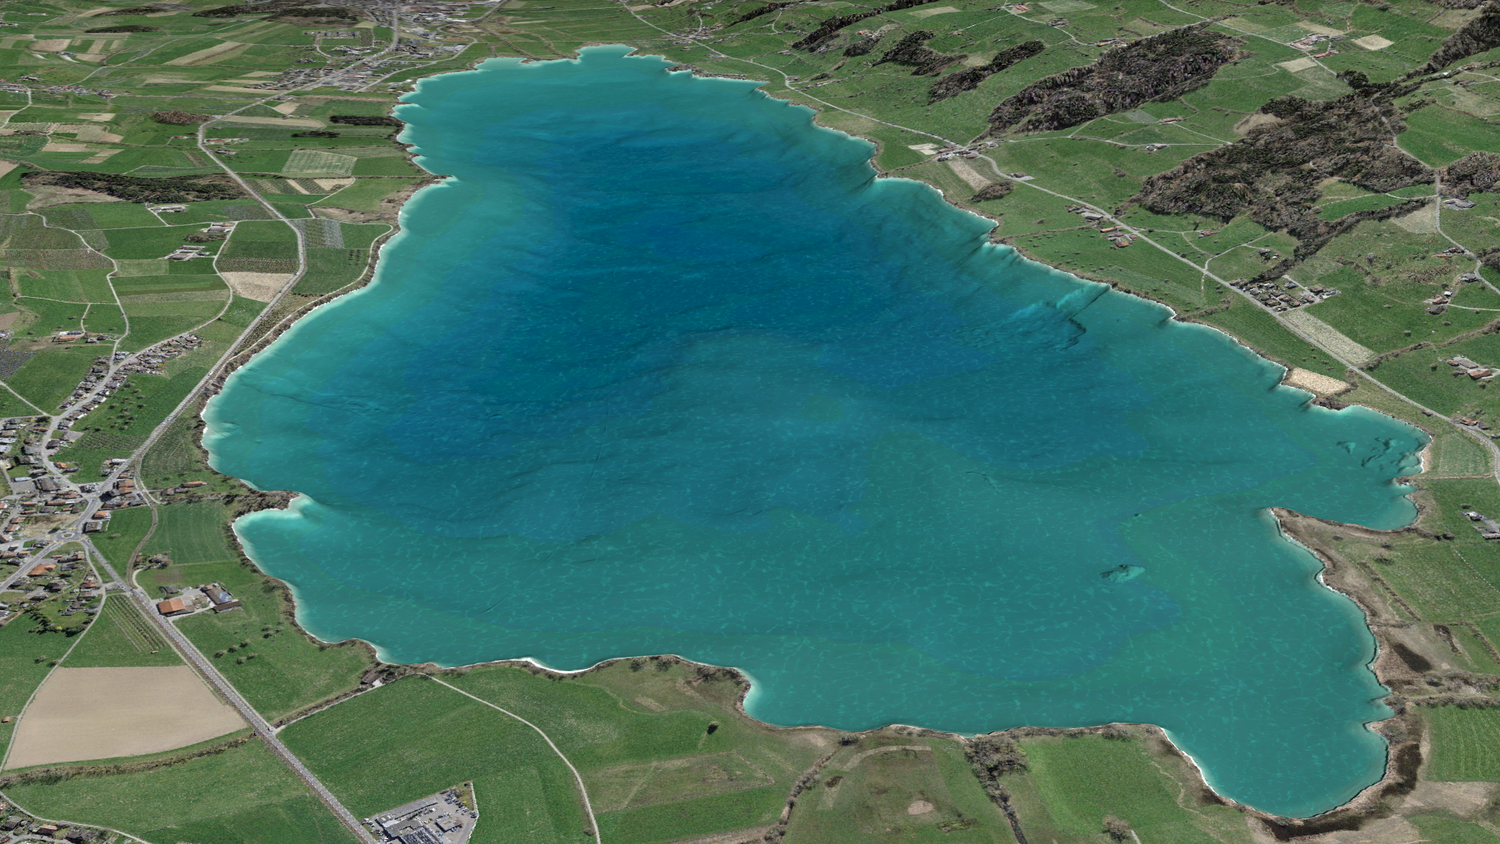 The picture shows the bottom of Lake Baldegg in the form of a shaded relief